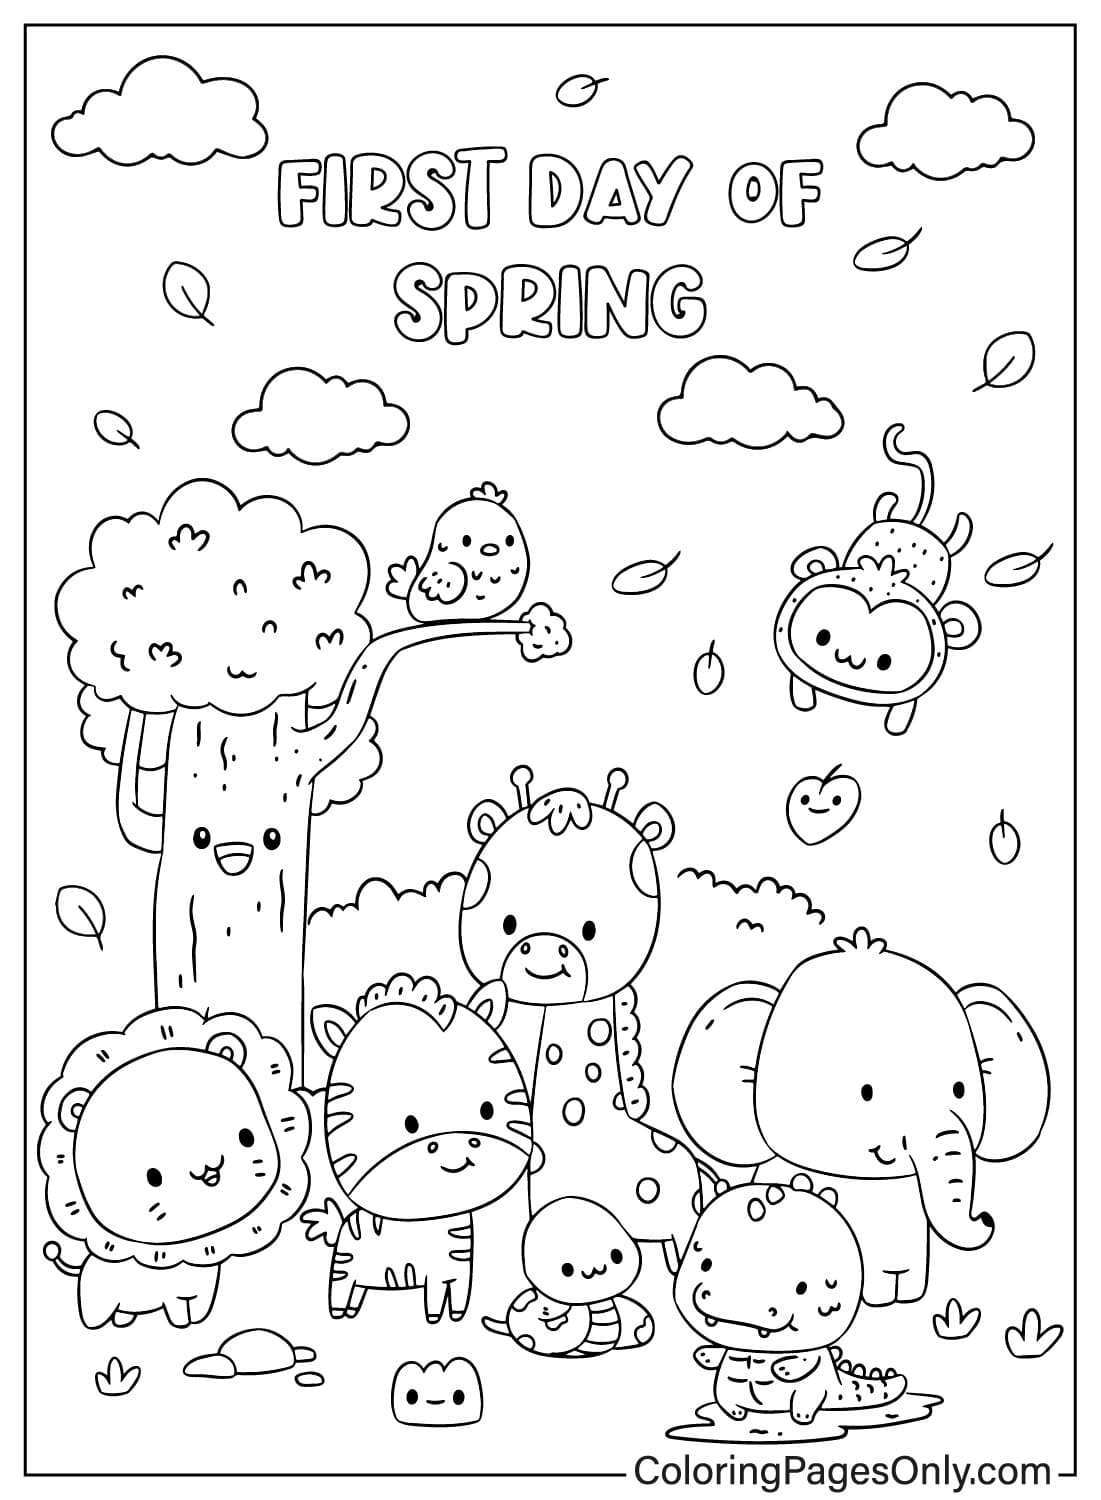 Animal First Day of Spring Coloring Page from First Day of Spring